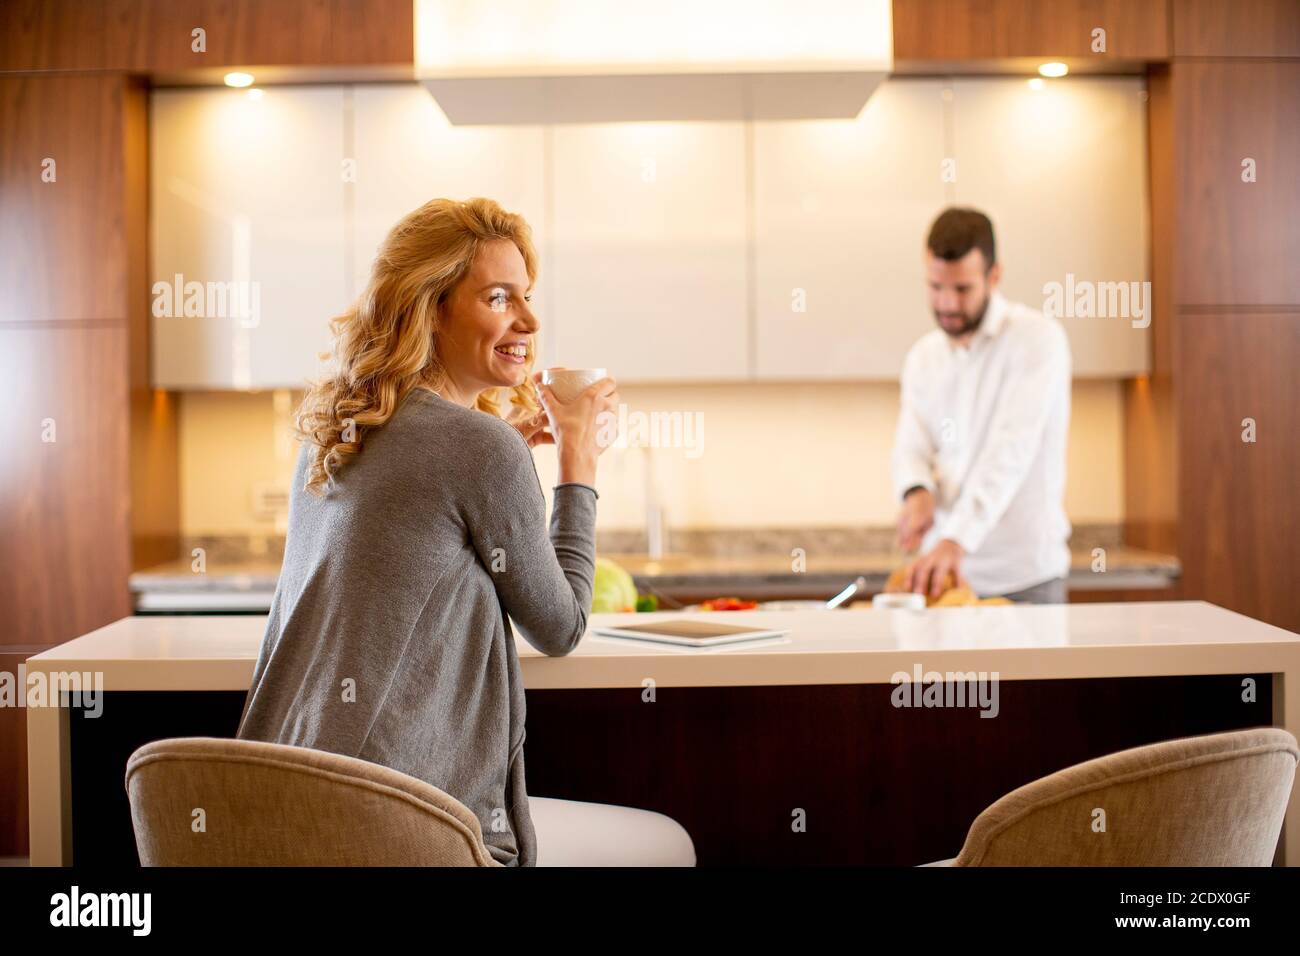 Young woman drinking coffee at the kitchen table while man preparing food Stock Photo